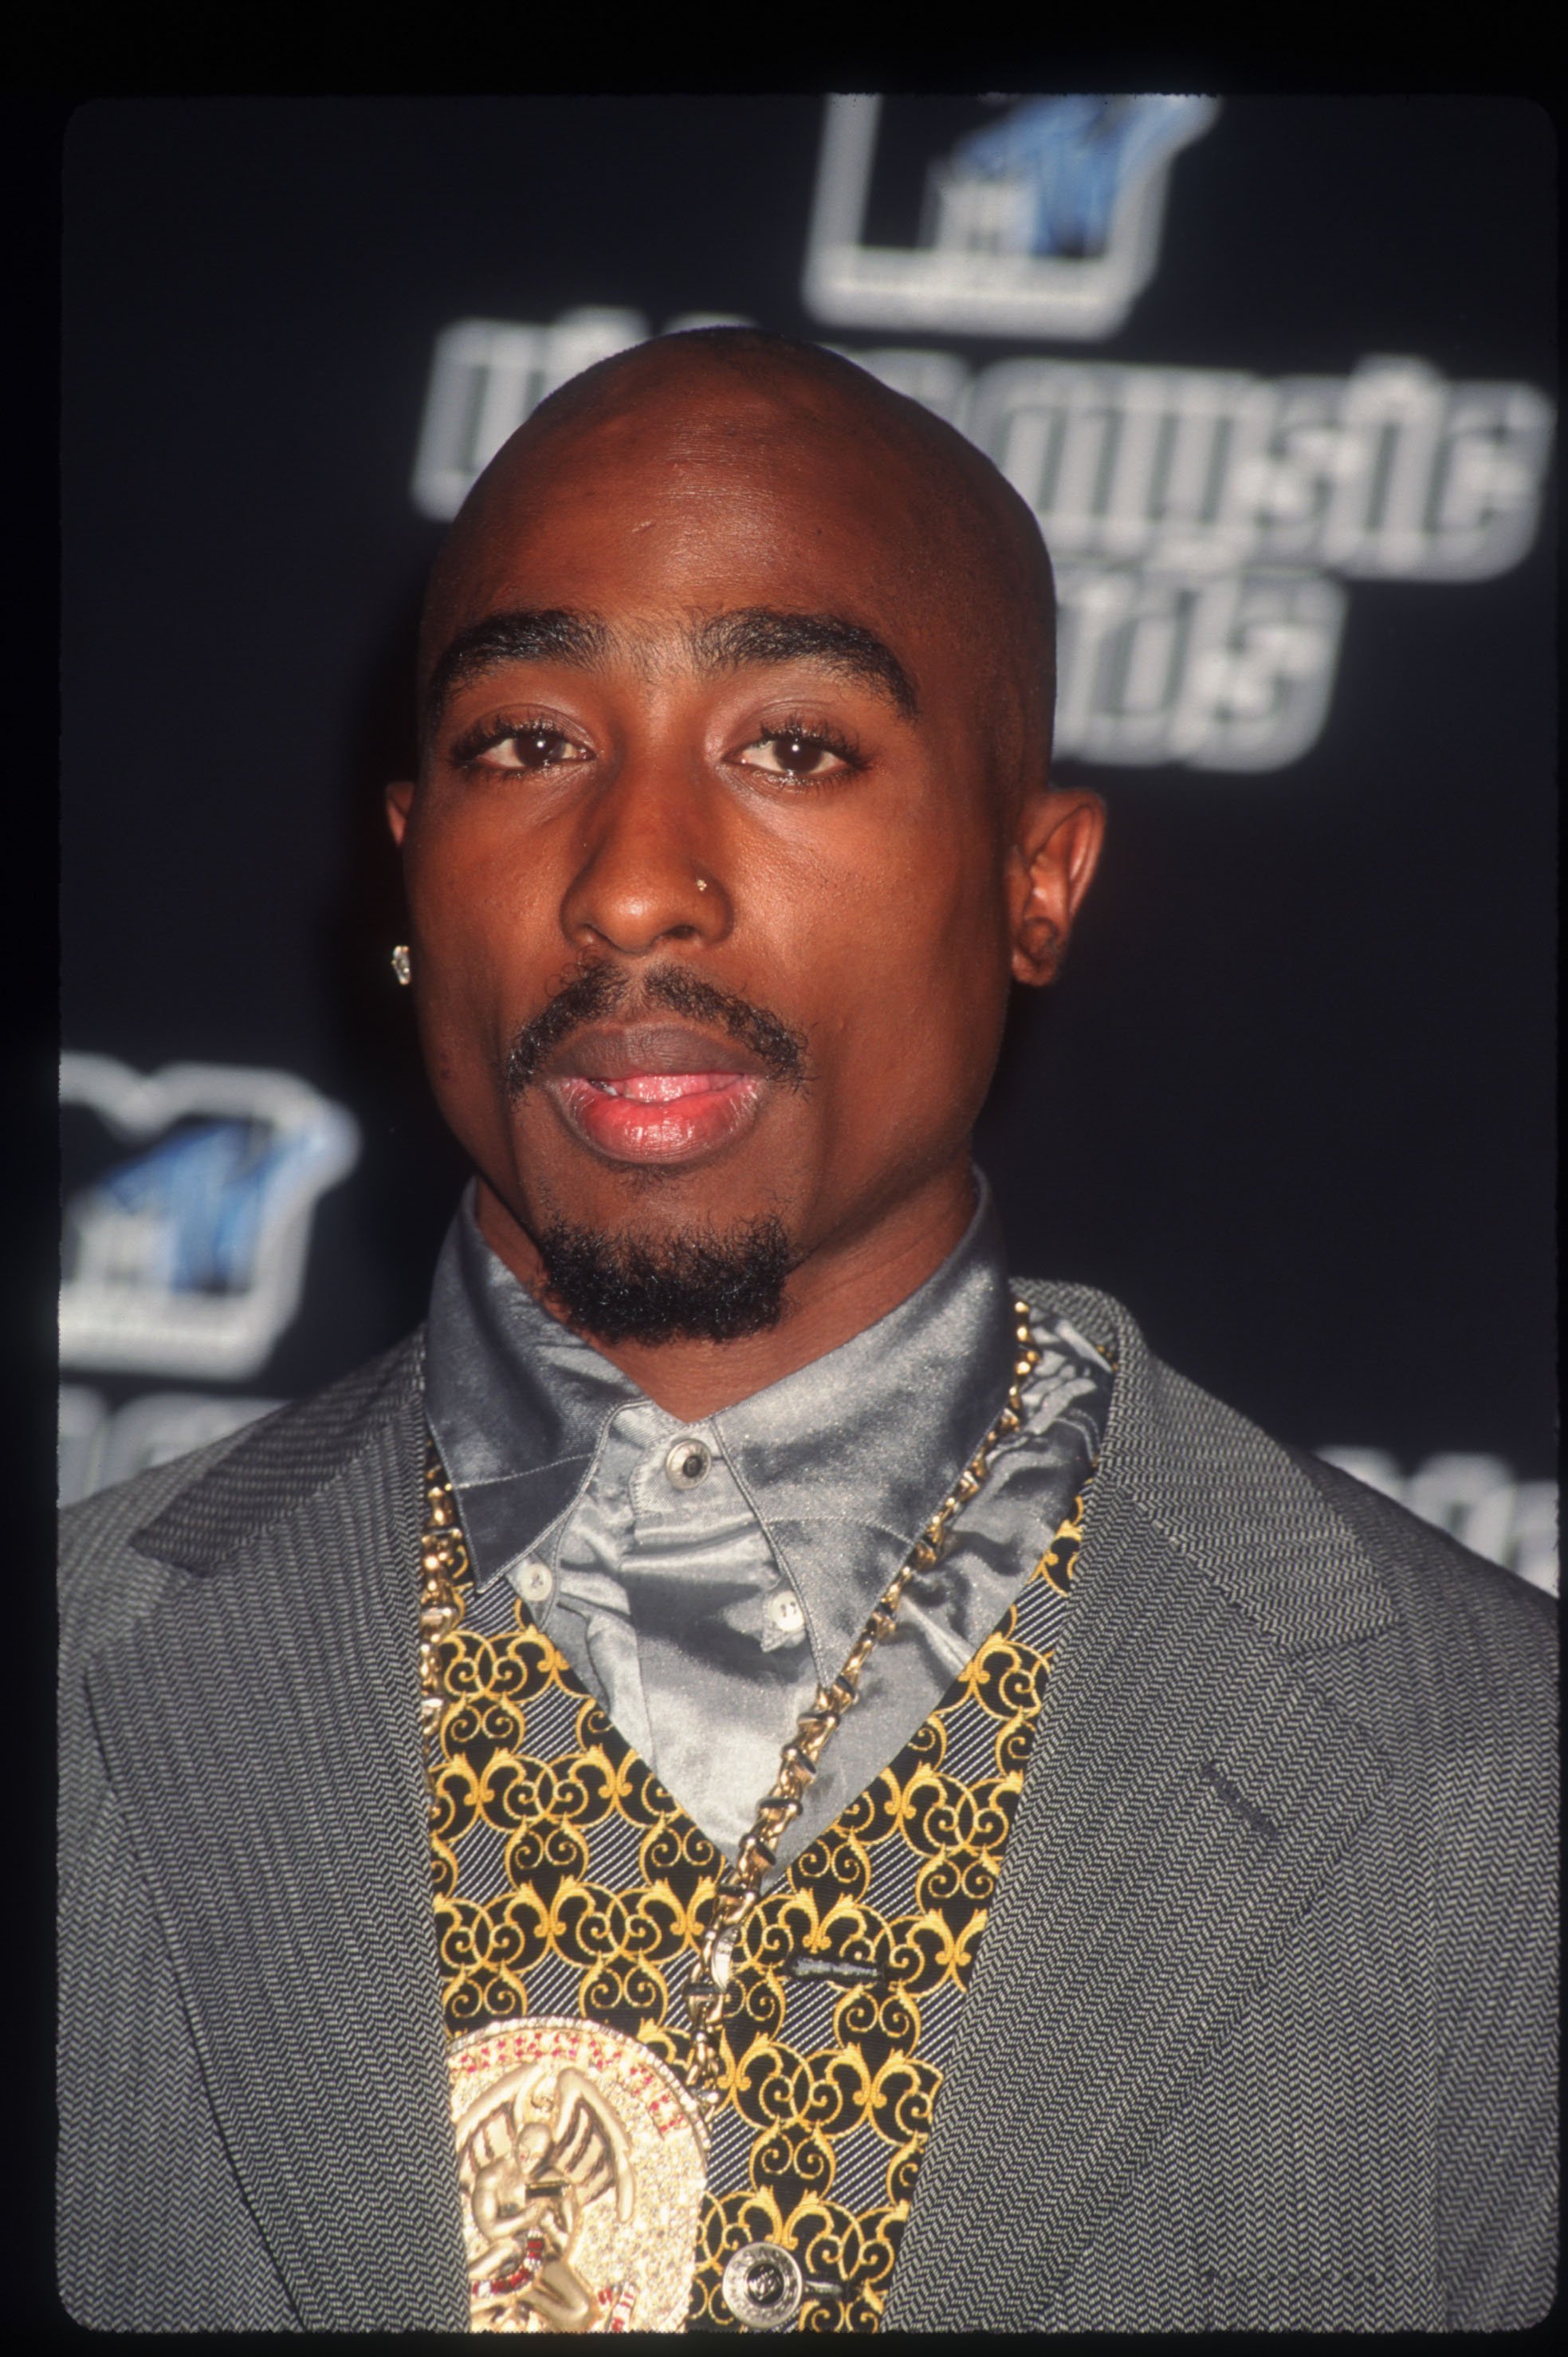 Tupac Shakur stands backstage at the MTV Video Music Awards on Sept. 4, 1996 in New York City | Photo: Getty Images